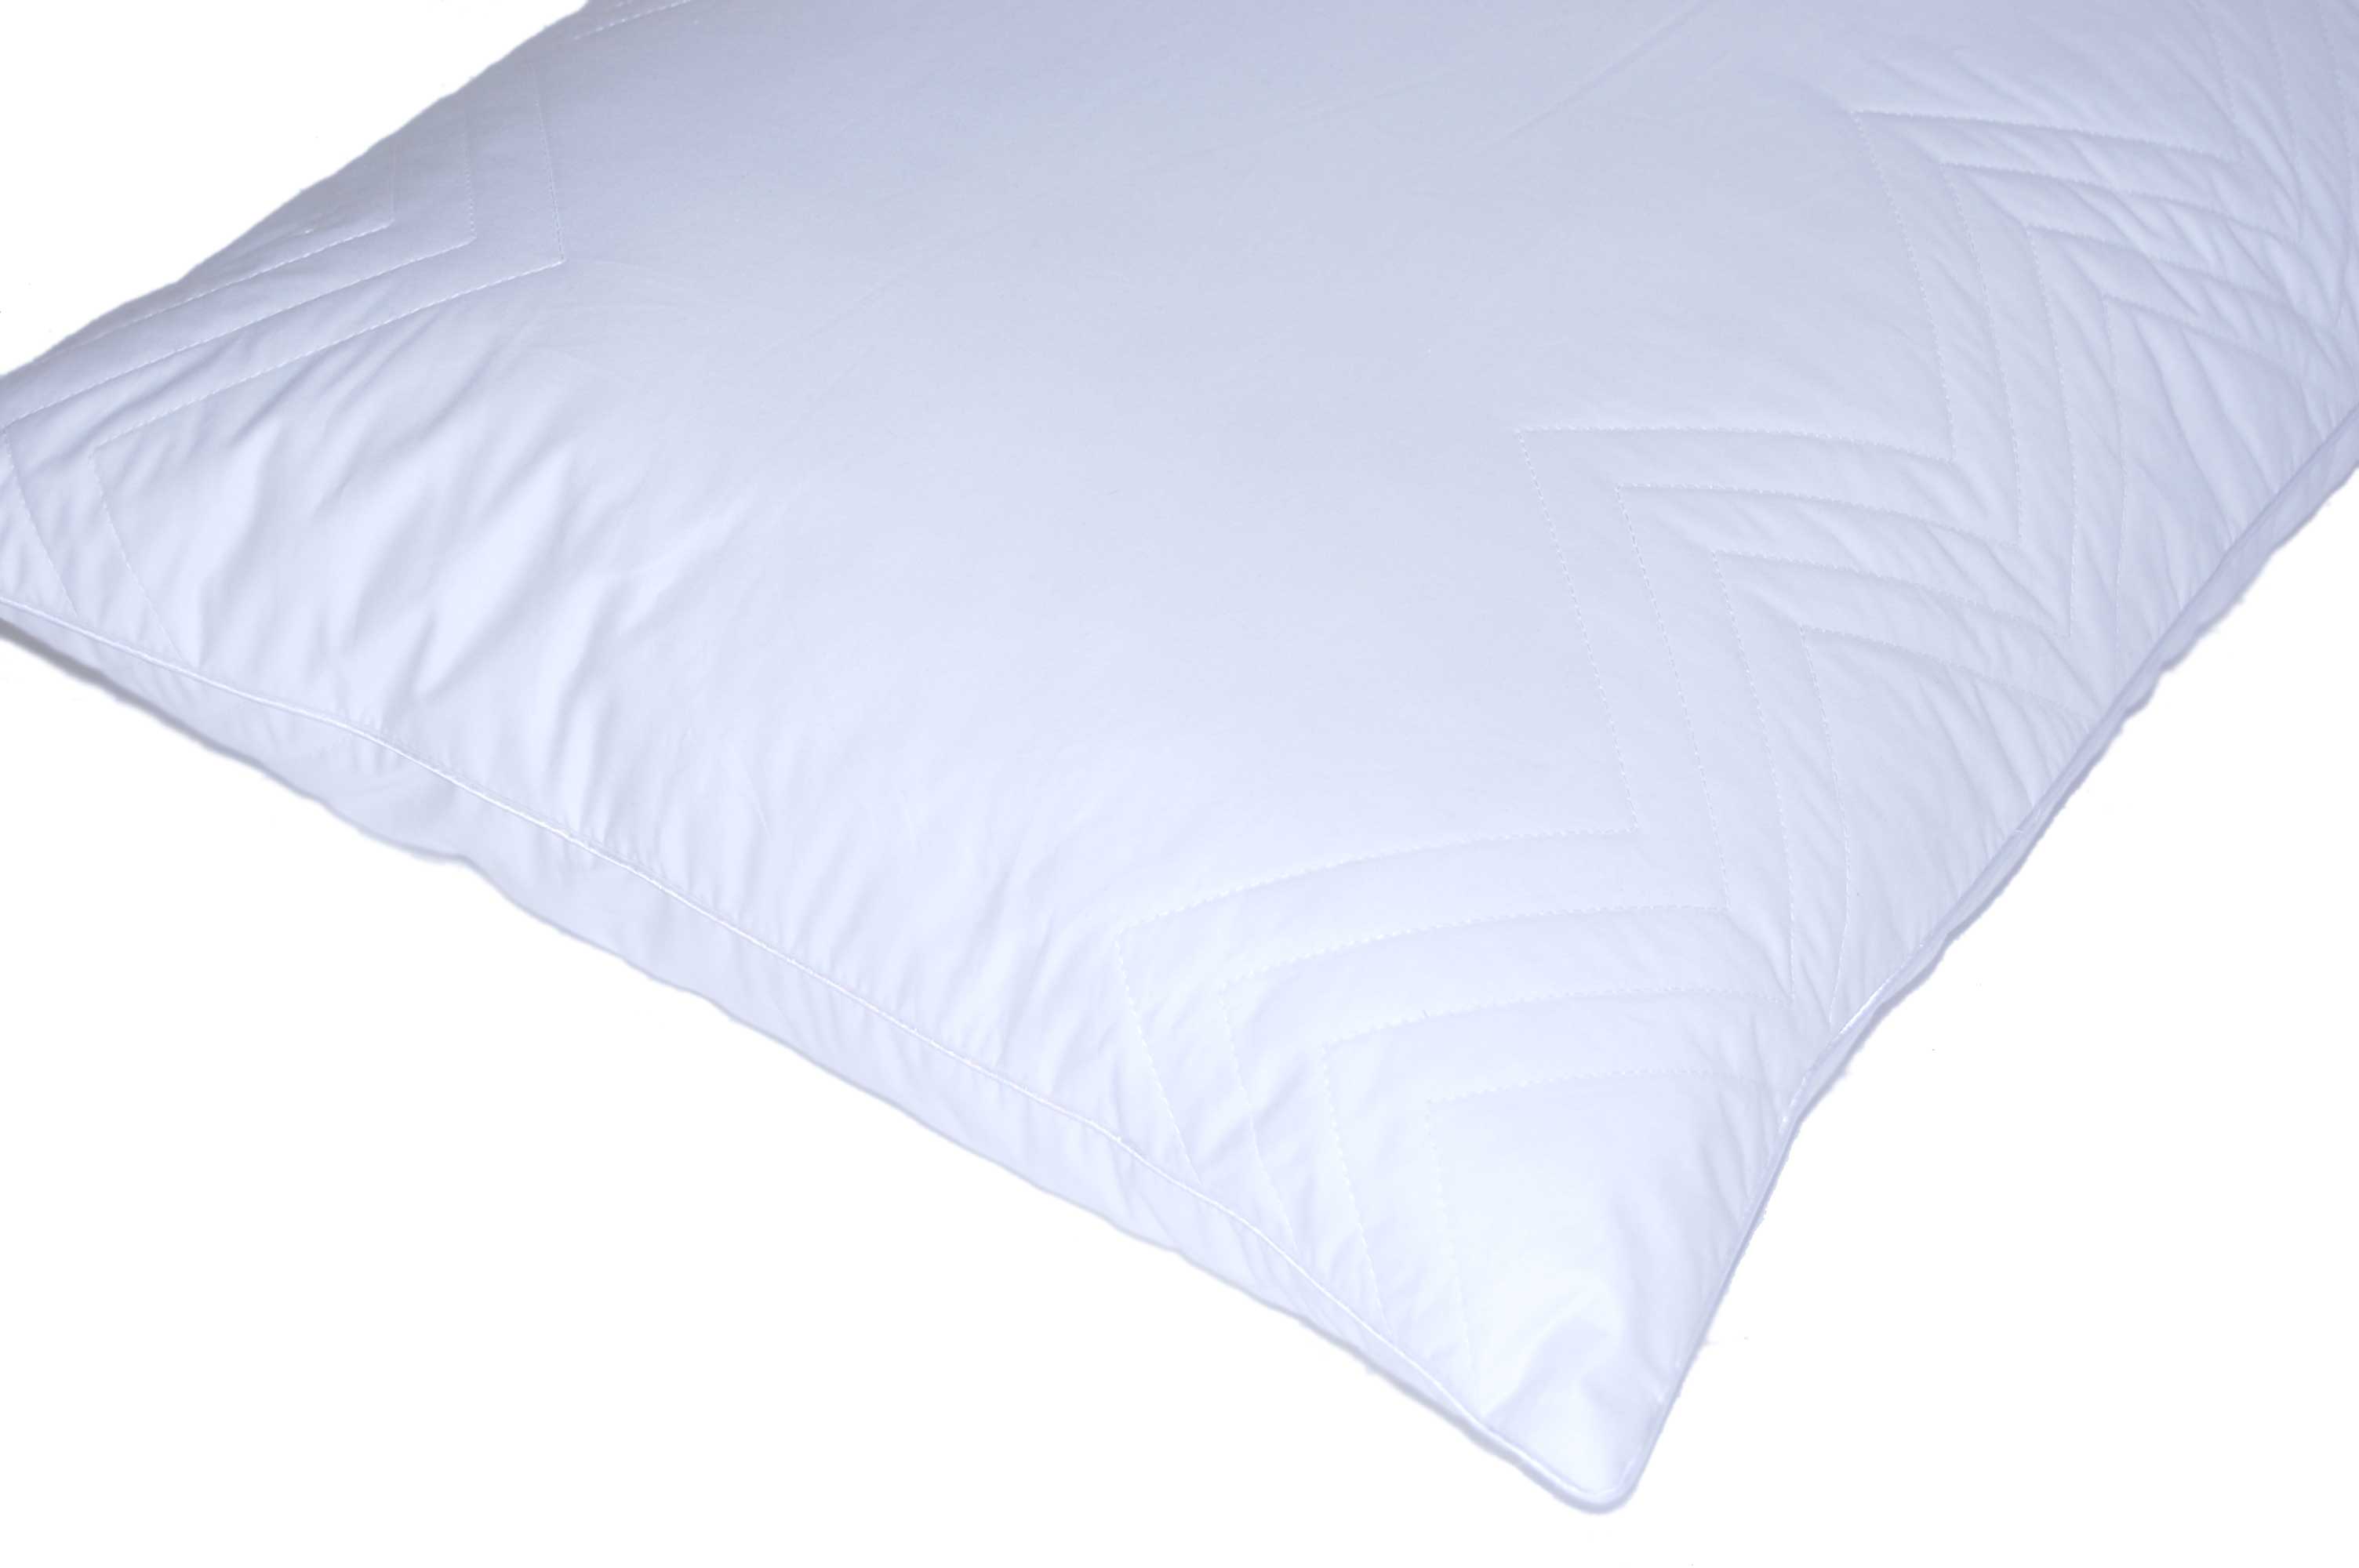 Review: Nordstrom Rack Down Feather Pillow